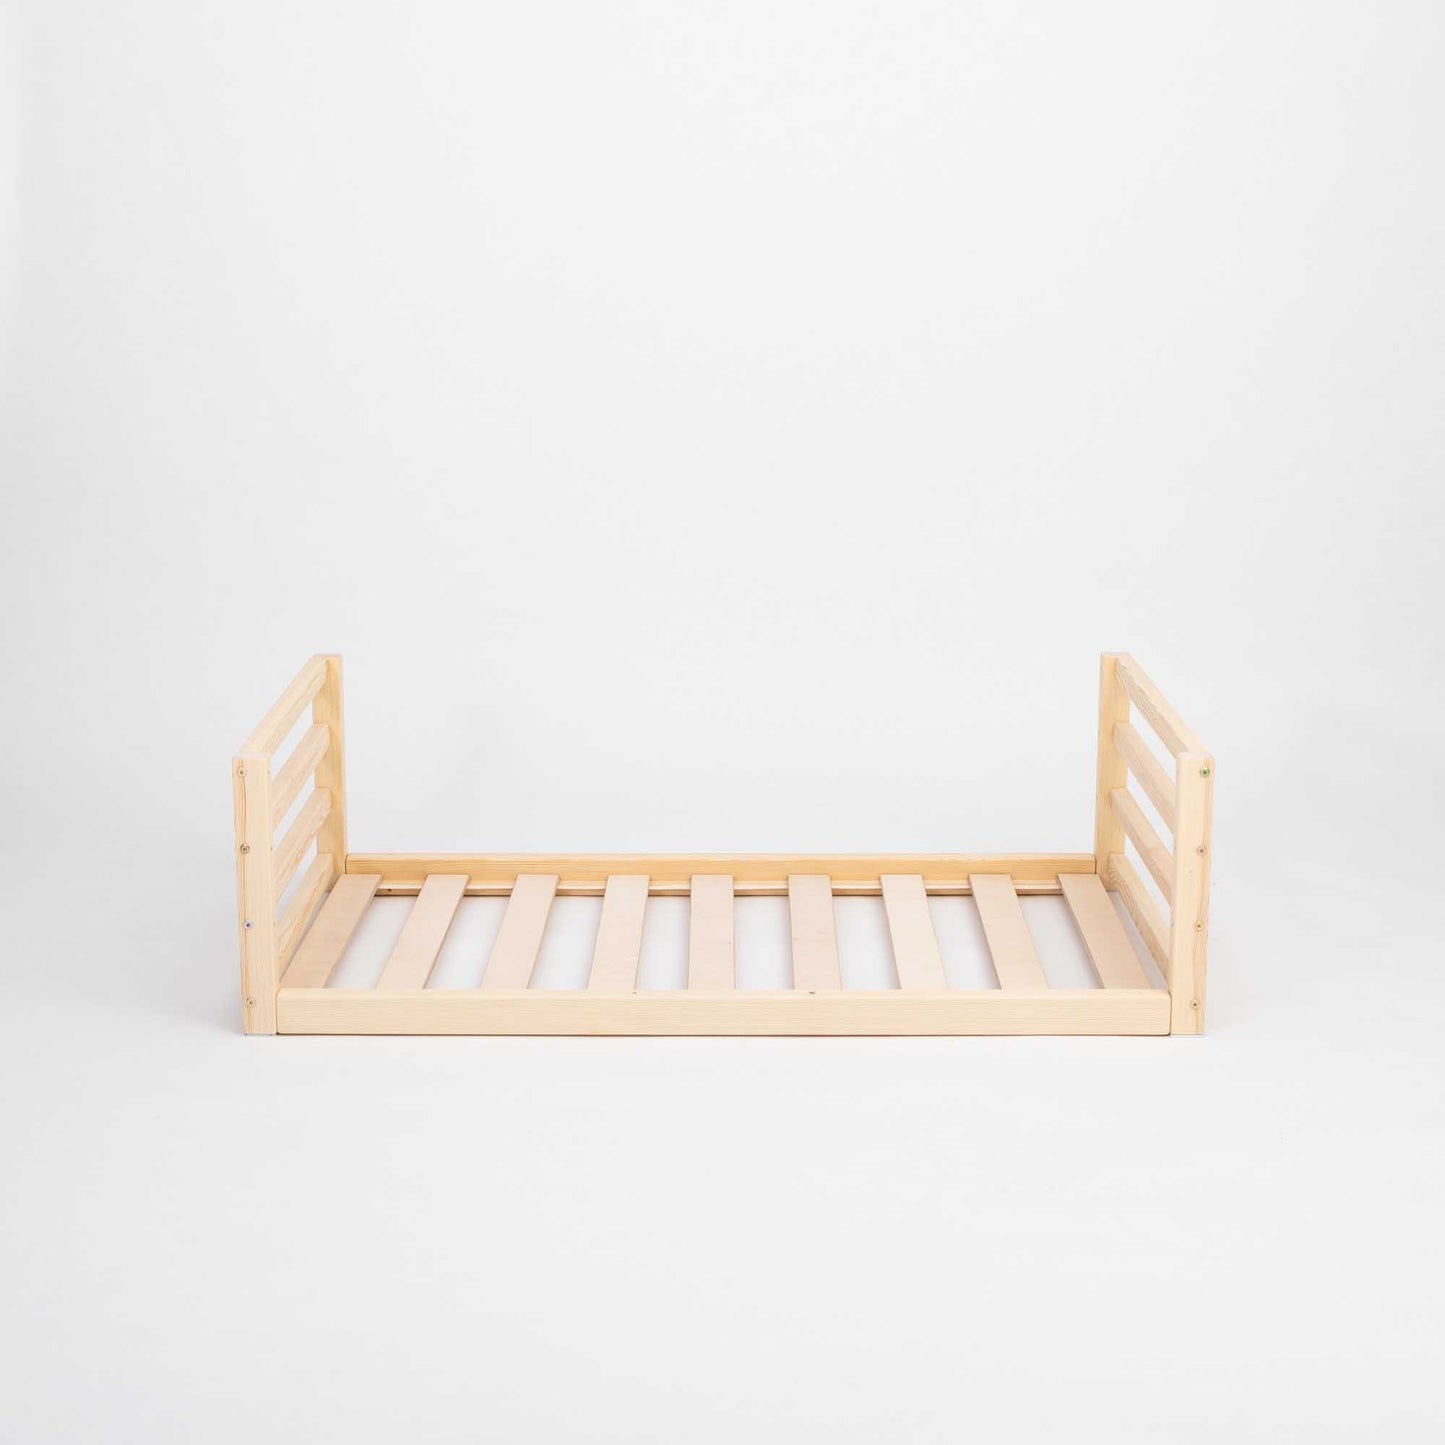 A Sweet Home From Wood toddler floor bed with a horizontal rail headboard and footboard, made of solid pine or birch wood with slats, placed on a white background.